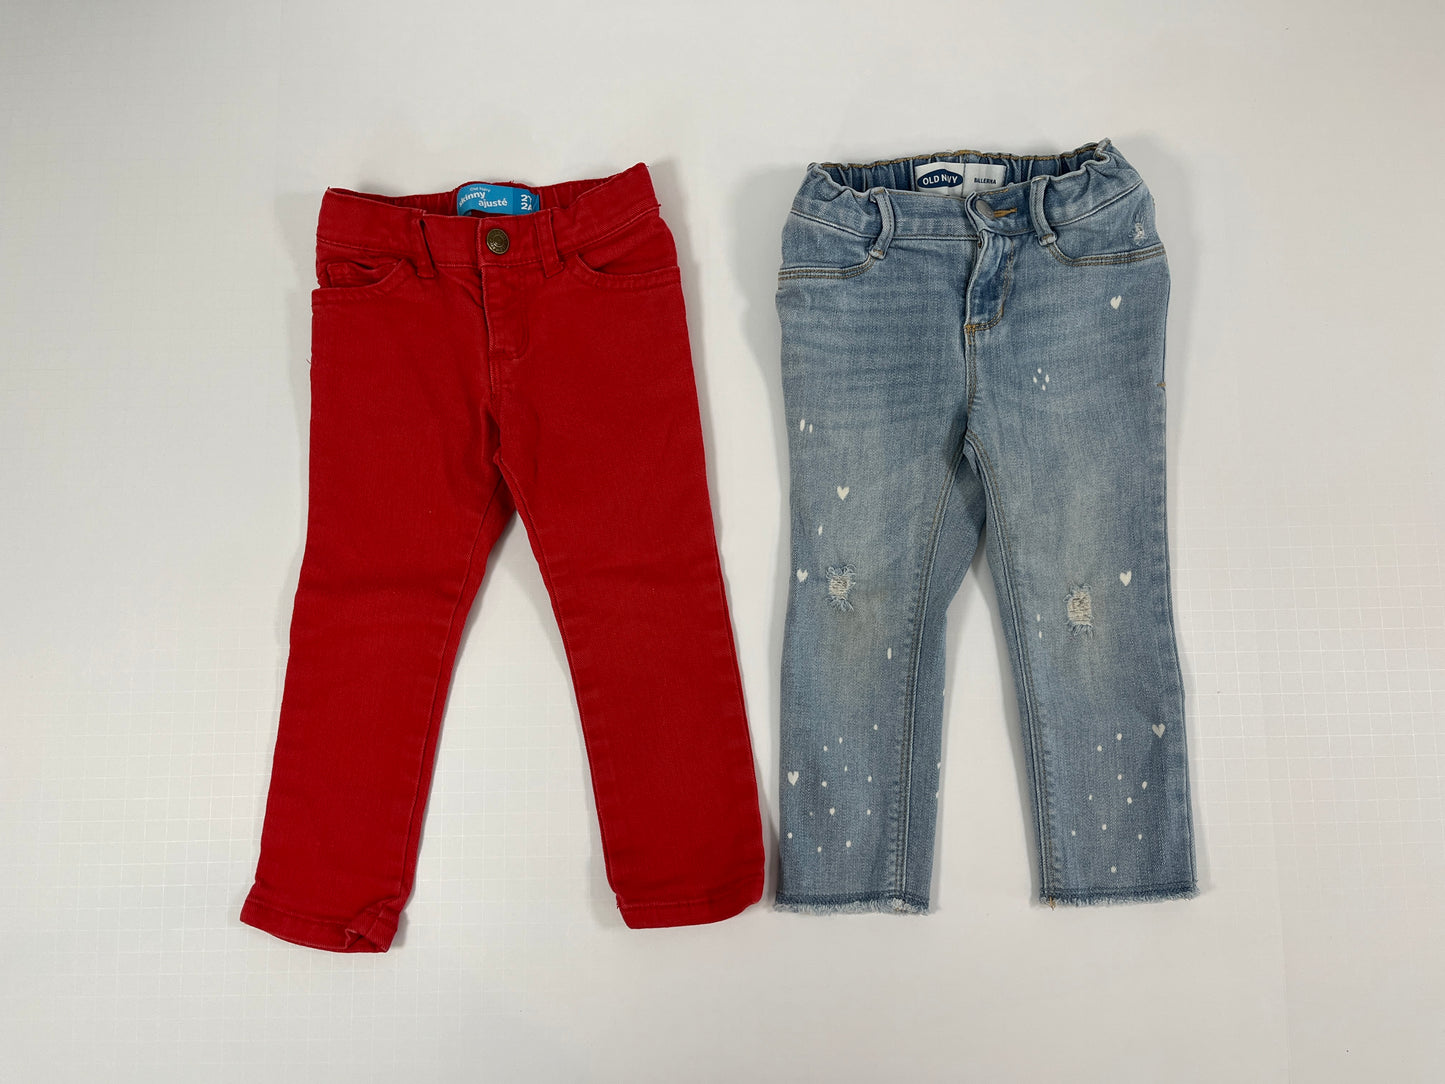 PPU 45242 2T girls Old Navy jeans bundle (2)